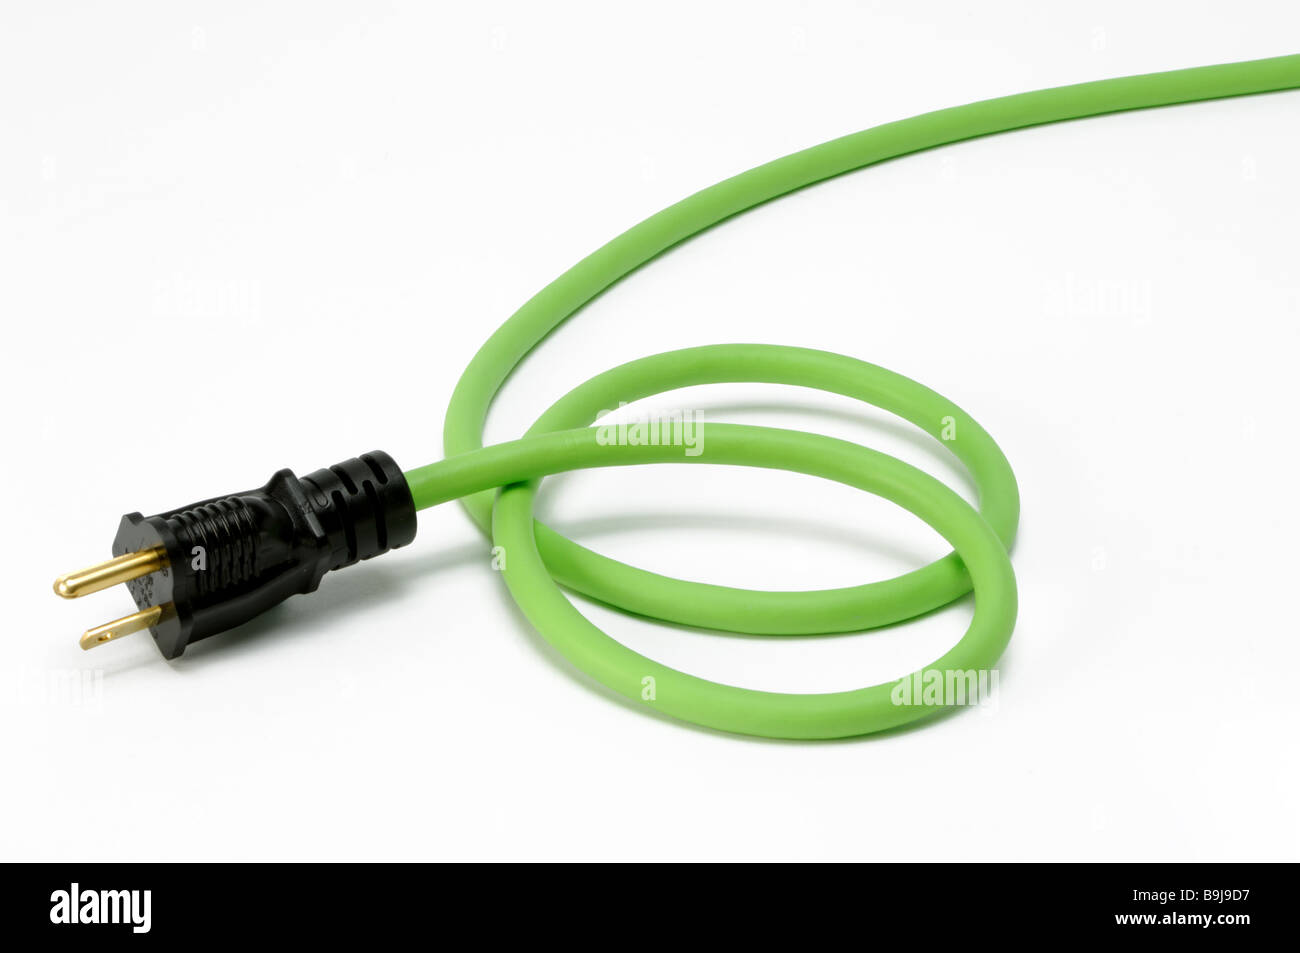 The end plug section of a green electrical extension power cord with one plug Stock Photo